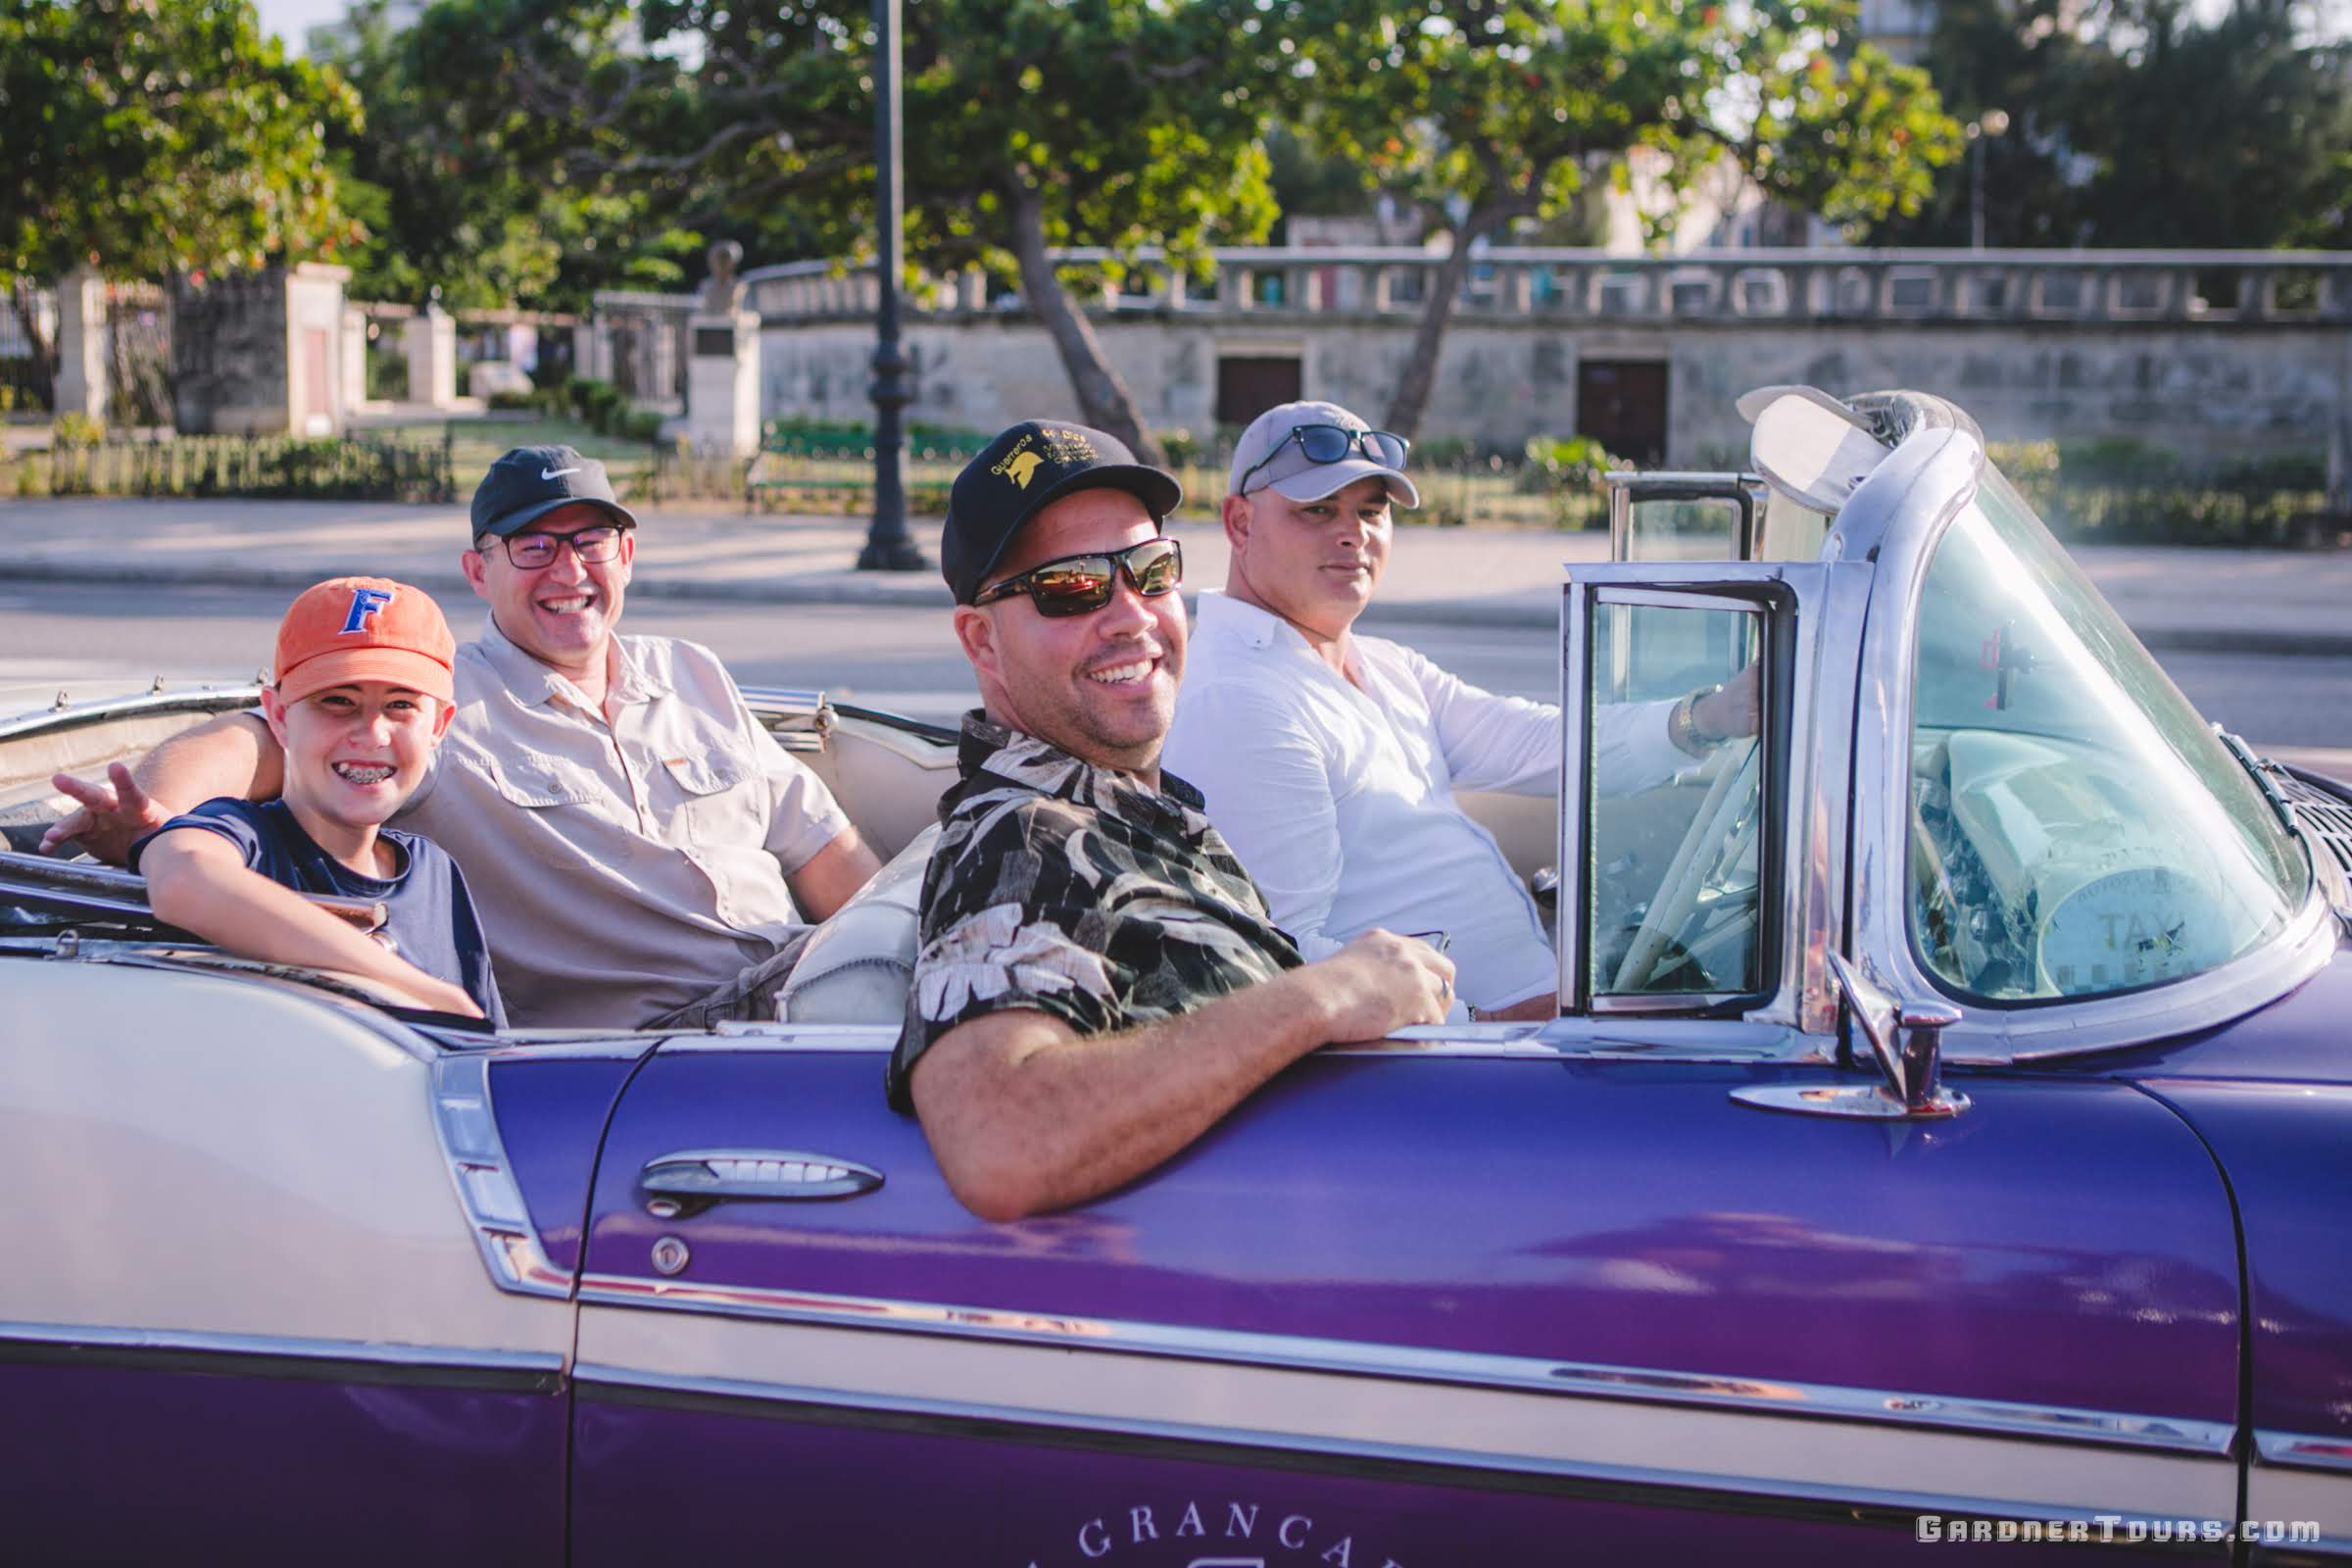 Gardner Tours Cuban Tour Guide Yunior riding in a purple car with two American travelers on a Classic Car Tour in Havana, Cuba